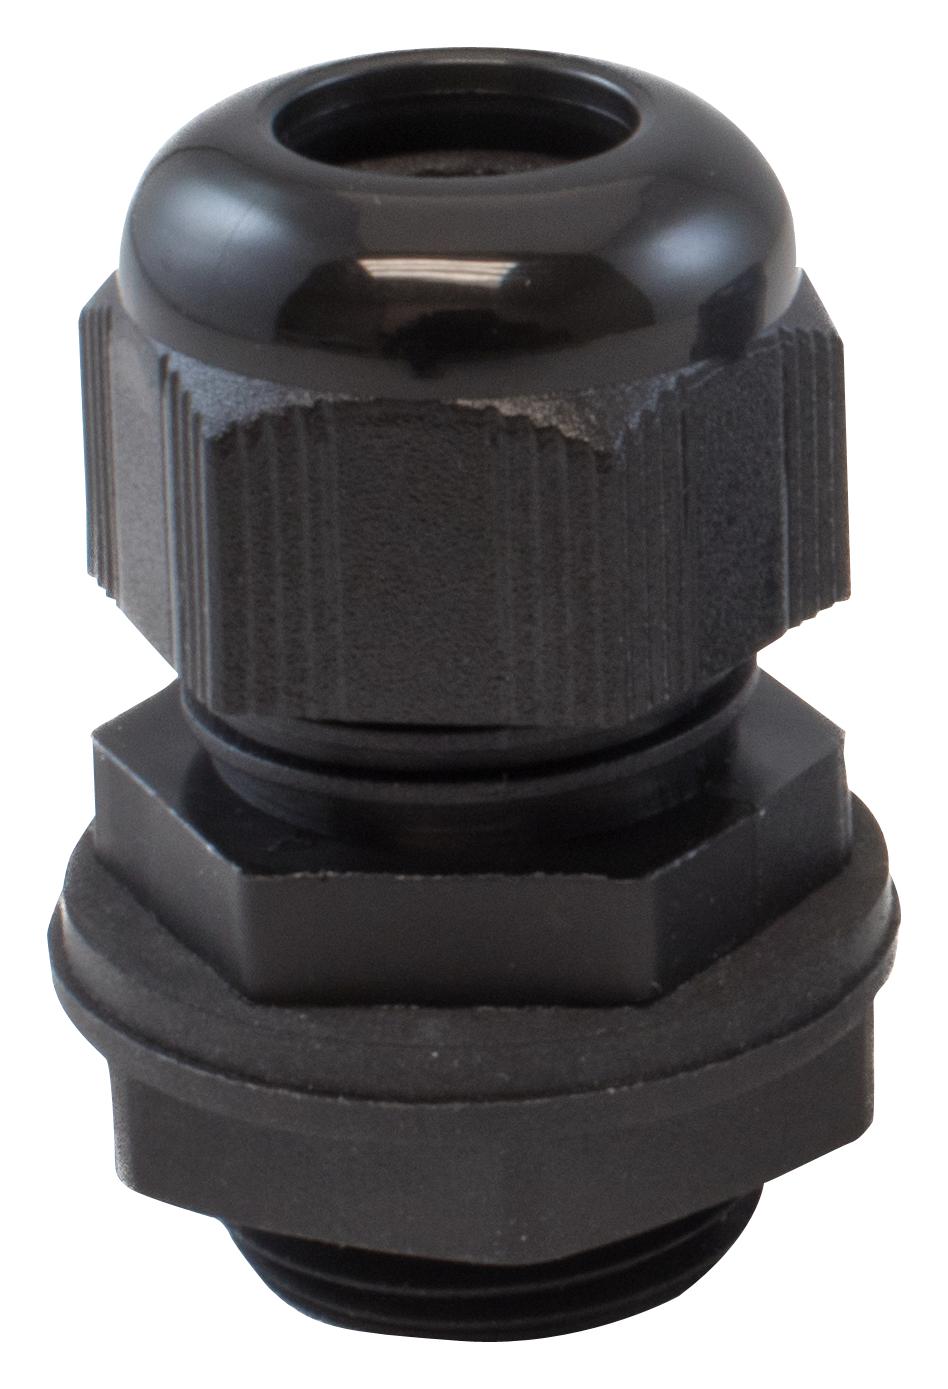 PMC20 BK080 CABLE GLAND, M20X1.5, PA 6, 6-12MM, BLK ALPHA WIRE